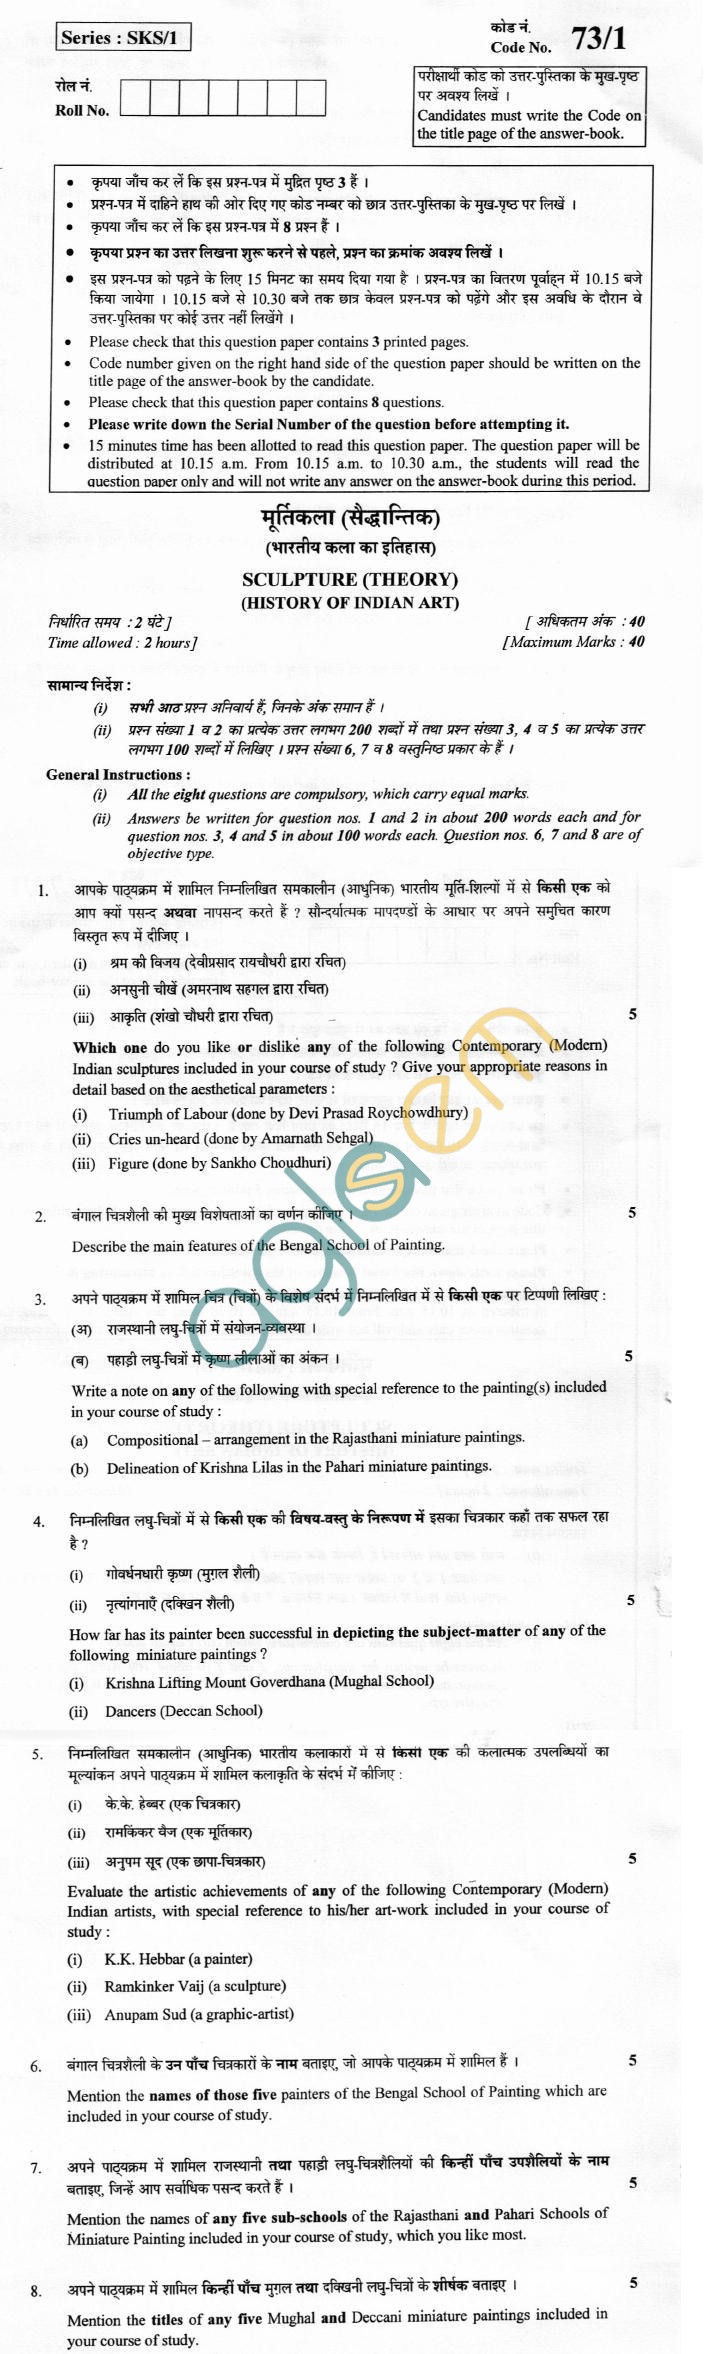 CBSE Board Exam 2013 Class XII Question Paper - Sculpture (History of indian art)